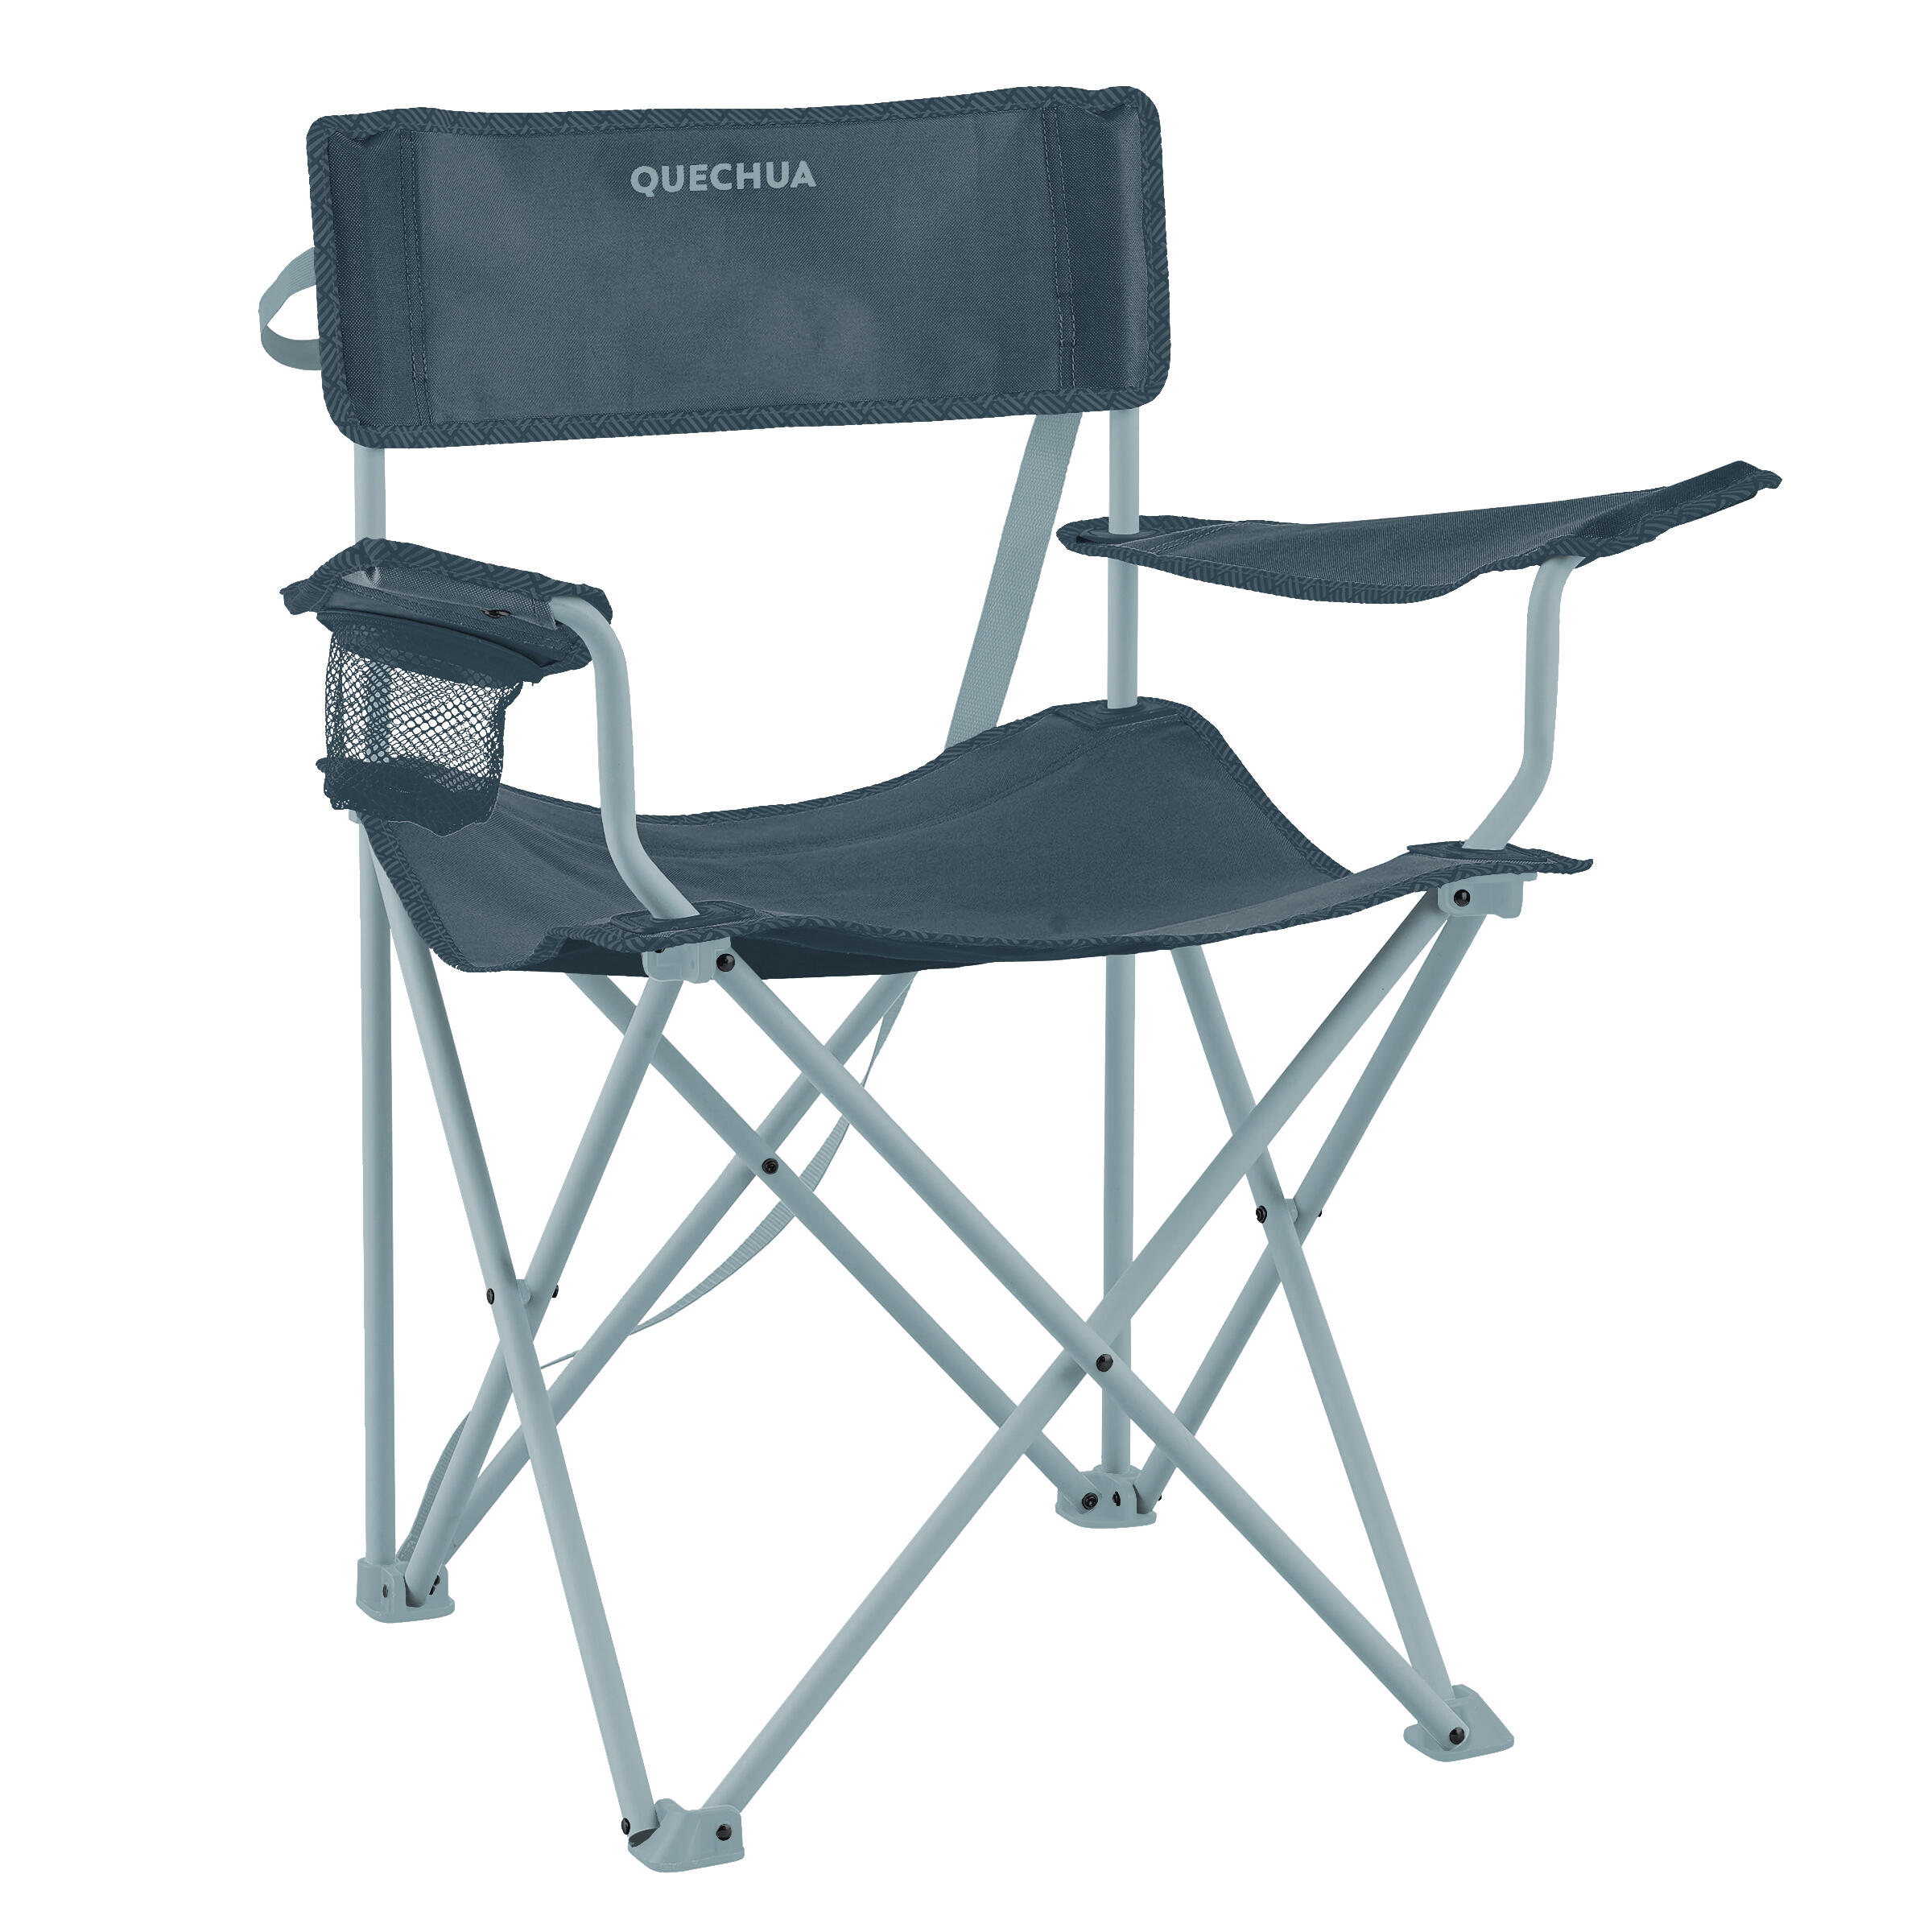 Camping Furniture and Equipment